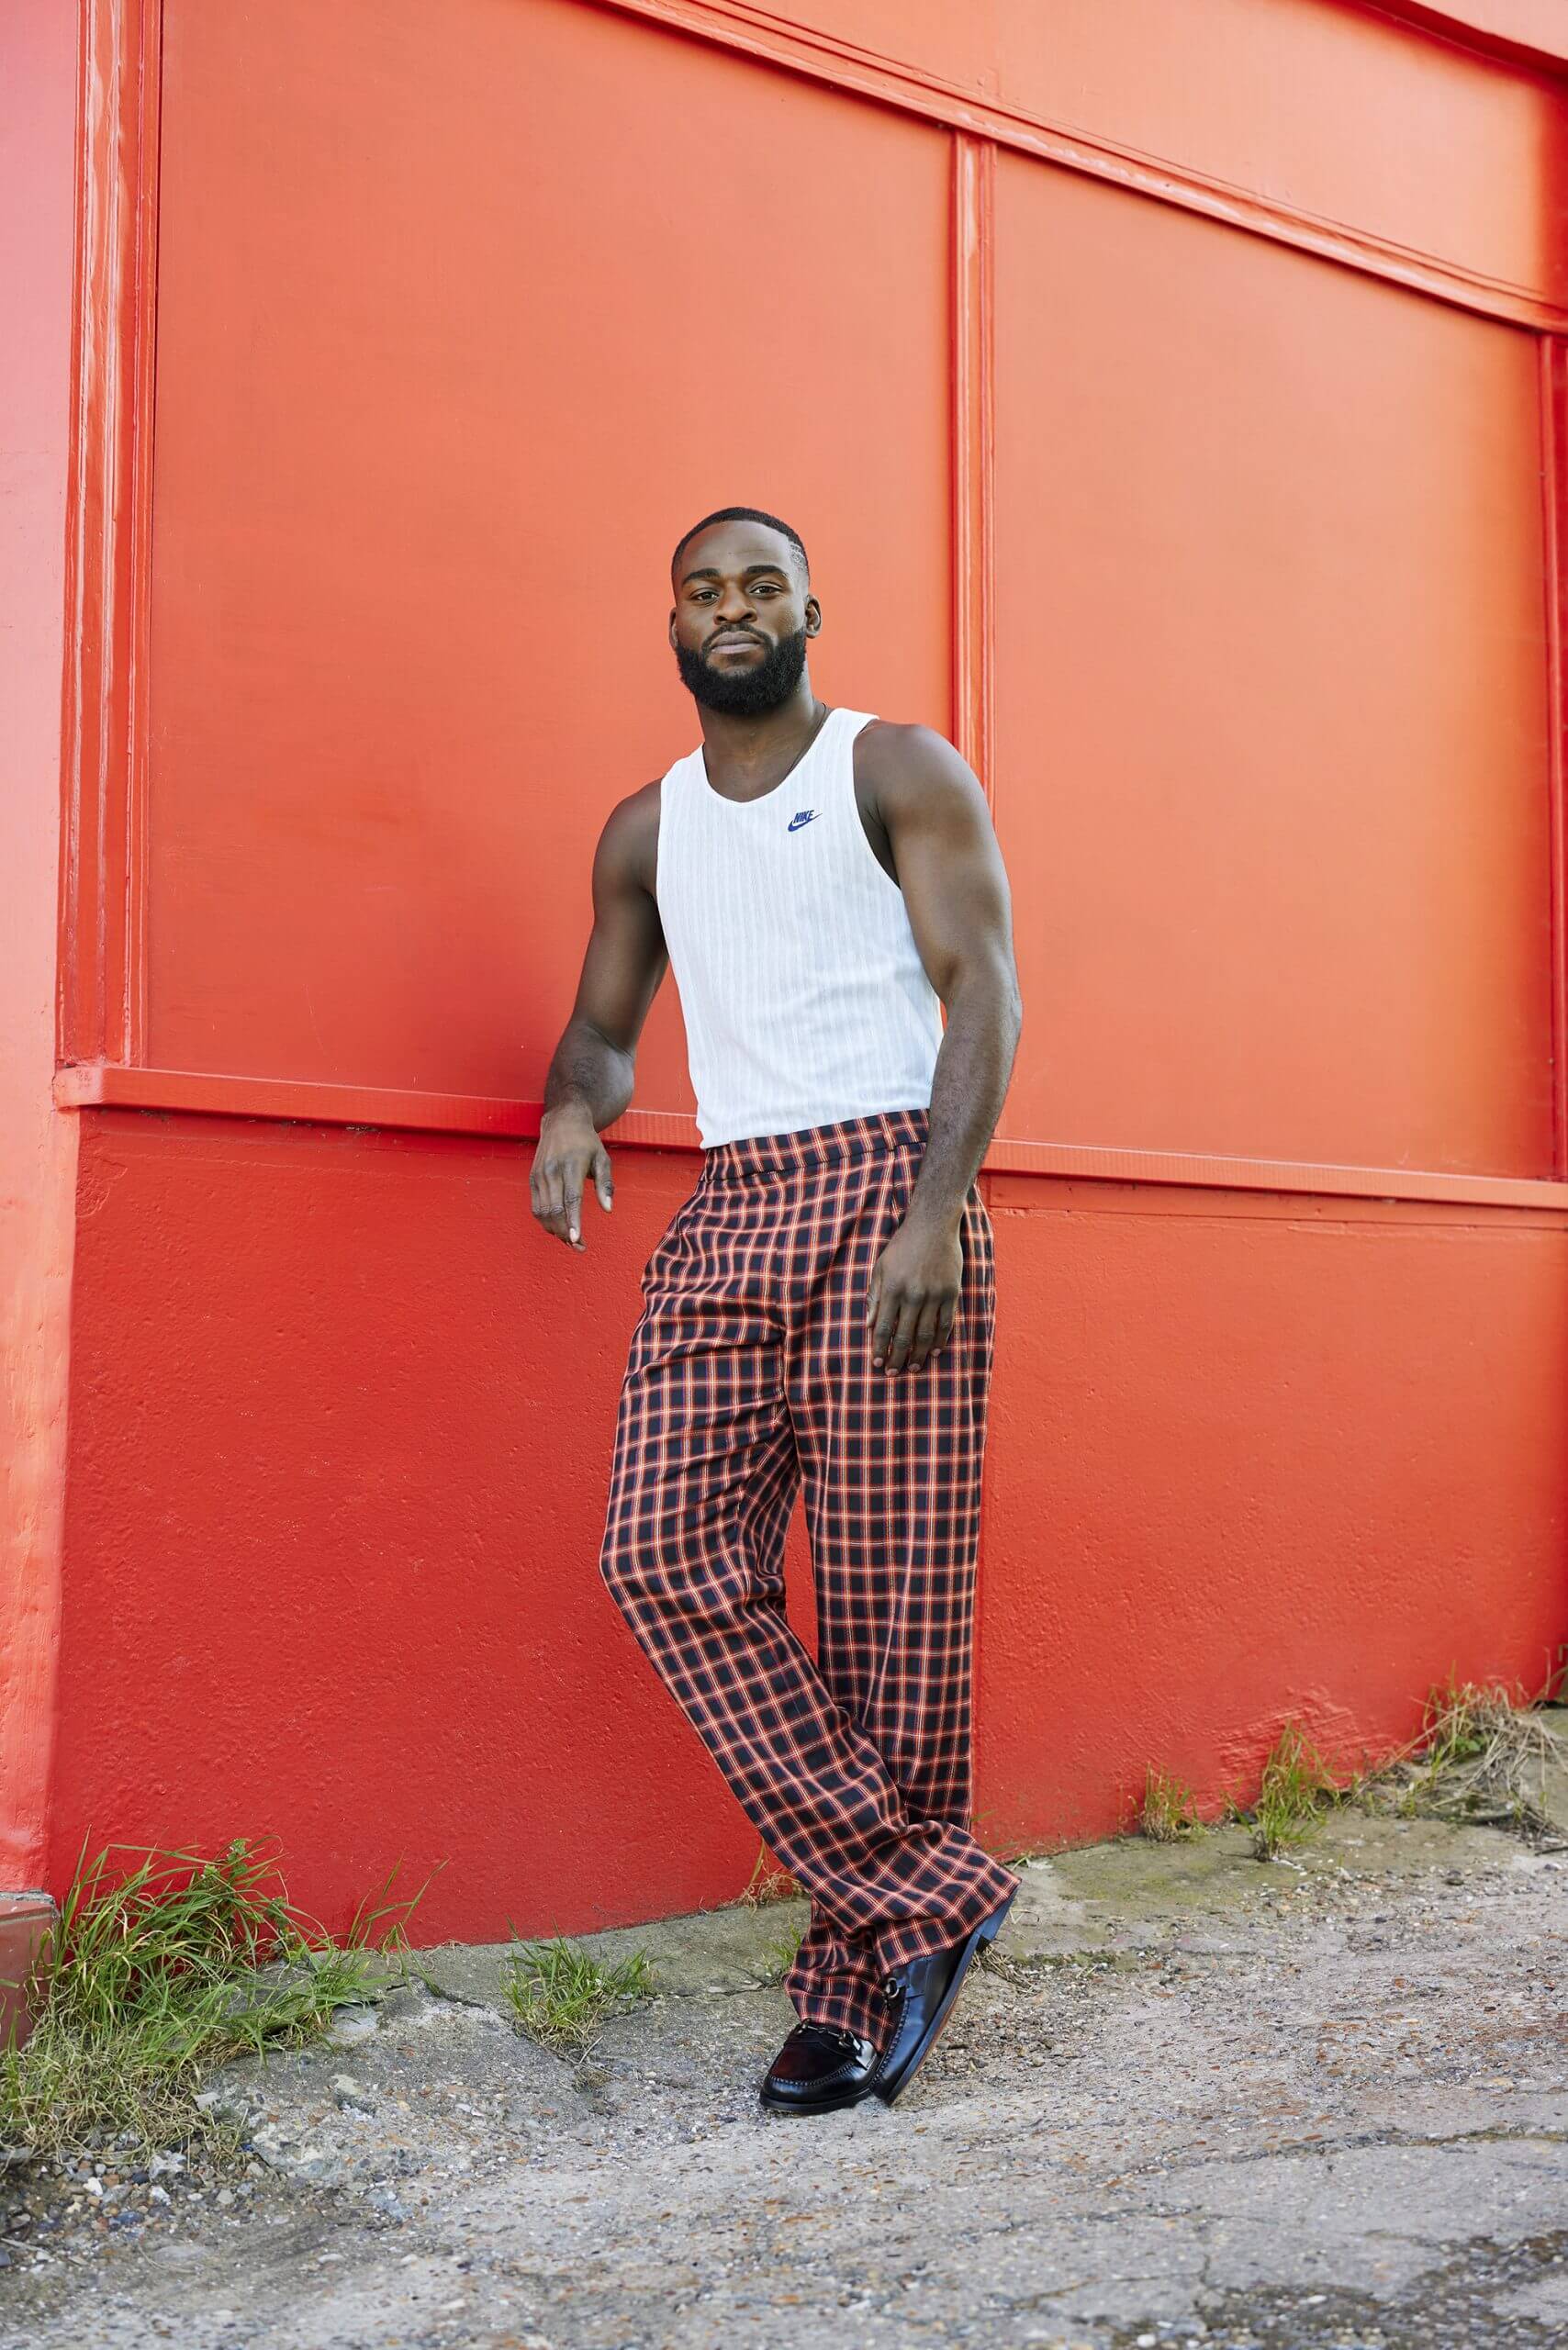 Joshua Buatsi stood in front of a bright orange painted wall outside